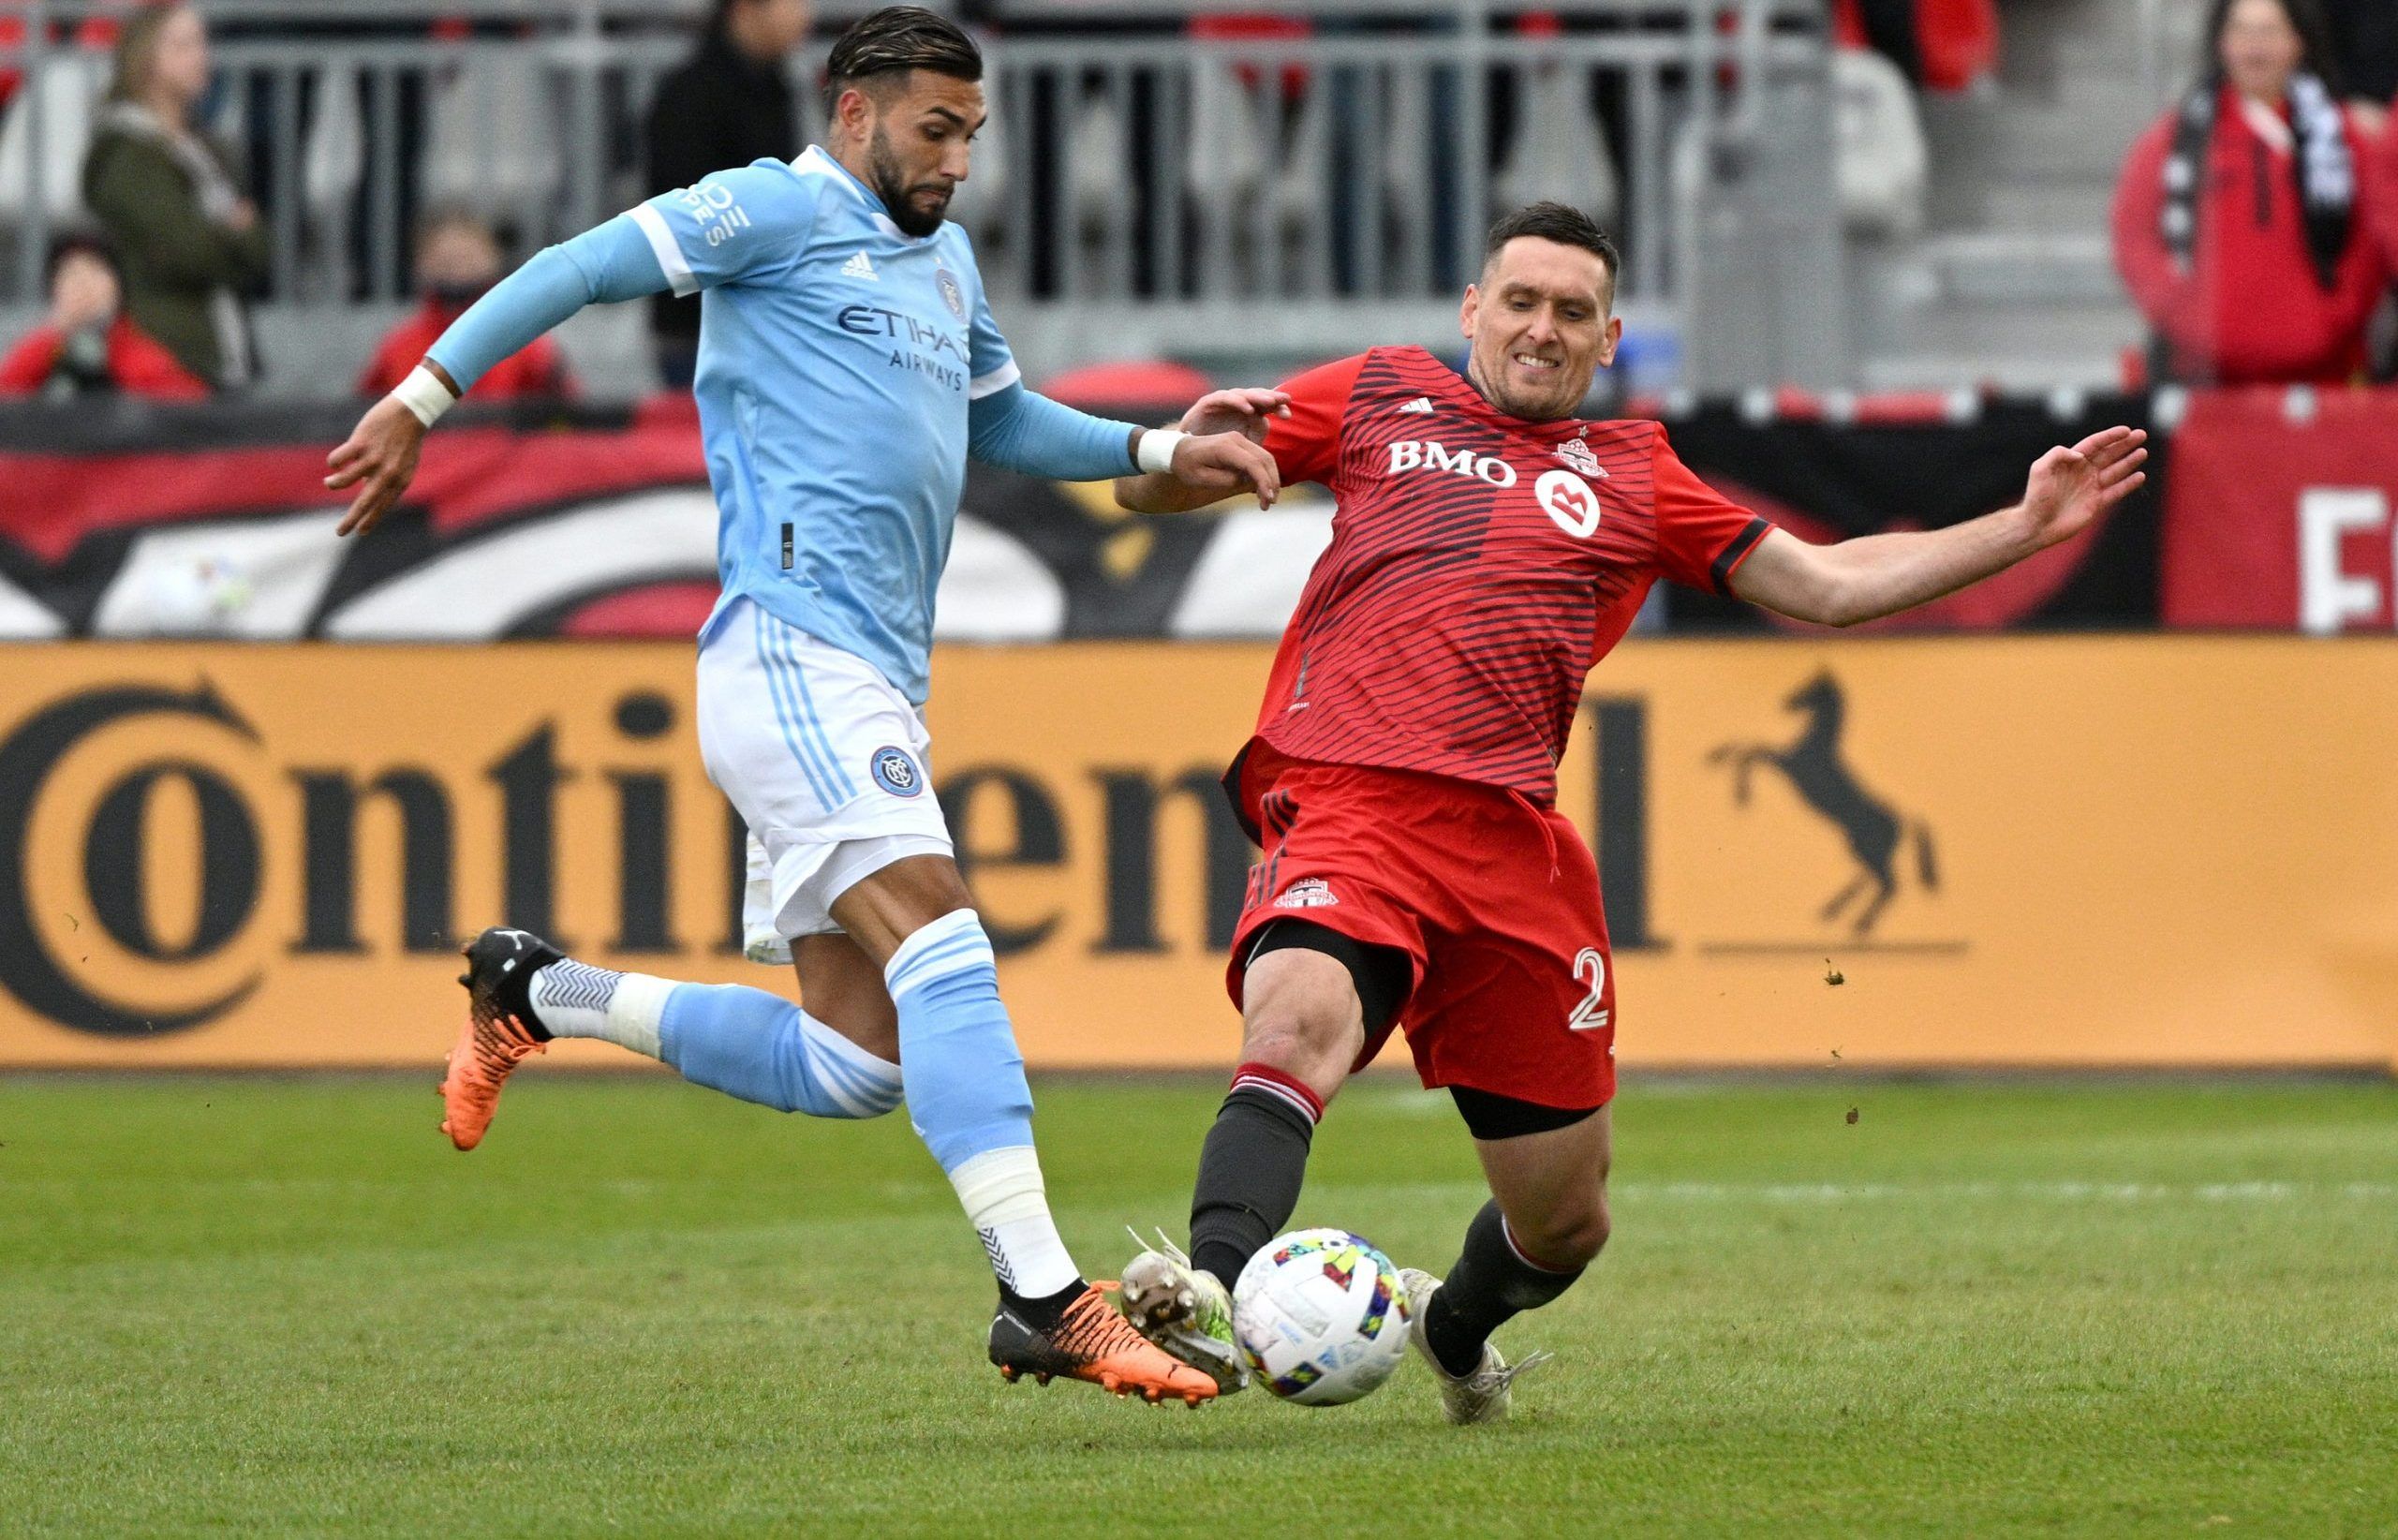 Apr 2, 2022; Toronto, Ontario, CAN;   Toronto FC defender Shane O'Neill (27) battles for the ball with New York City FC forward Valentin Castellanos (11) in the first half at BMO Field. Mandatory Credit: Dan Hamilton-USA TODAY Sports